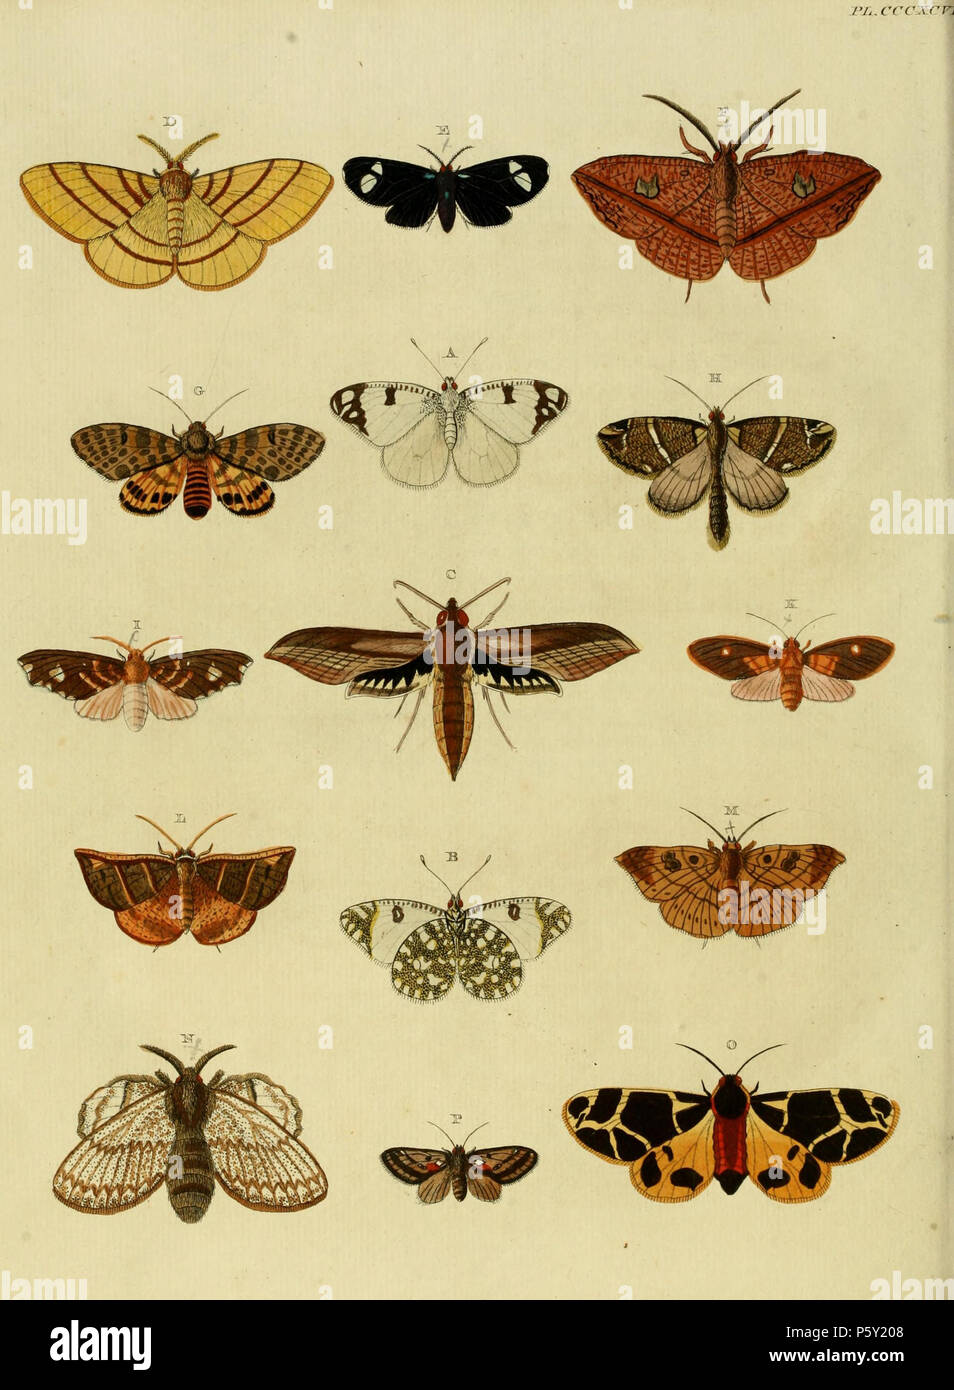 N/A. Plate CCCXCVII Warning: some taxa/names may be misidentified/misapplied or placed in a different genus.  A, B: [ Phalaena] Belia ( = Euchloe belia (Stoll, 1782), see NHM, Global Lepidoptera Names Index).  C: [Sphinx] Tersa ( = Xylophanes tersa (Linnaeus, 1771), see Funet). Photos on Moth Photographers Group, Mississippi State University.  D: [ Phalaena] Petosiris ( = Eupterote hibisci Fabricius, 1775, see NHM, Global Lepidoptera Names Index).  E: [ Phalaena] Porphyria ( = Agyrta porphyria (Cramer, 1782), iconotype, see NHM, Global Lepidoptera Names Index).  Stoll uses the name Porphyria a Stock Photo